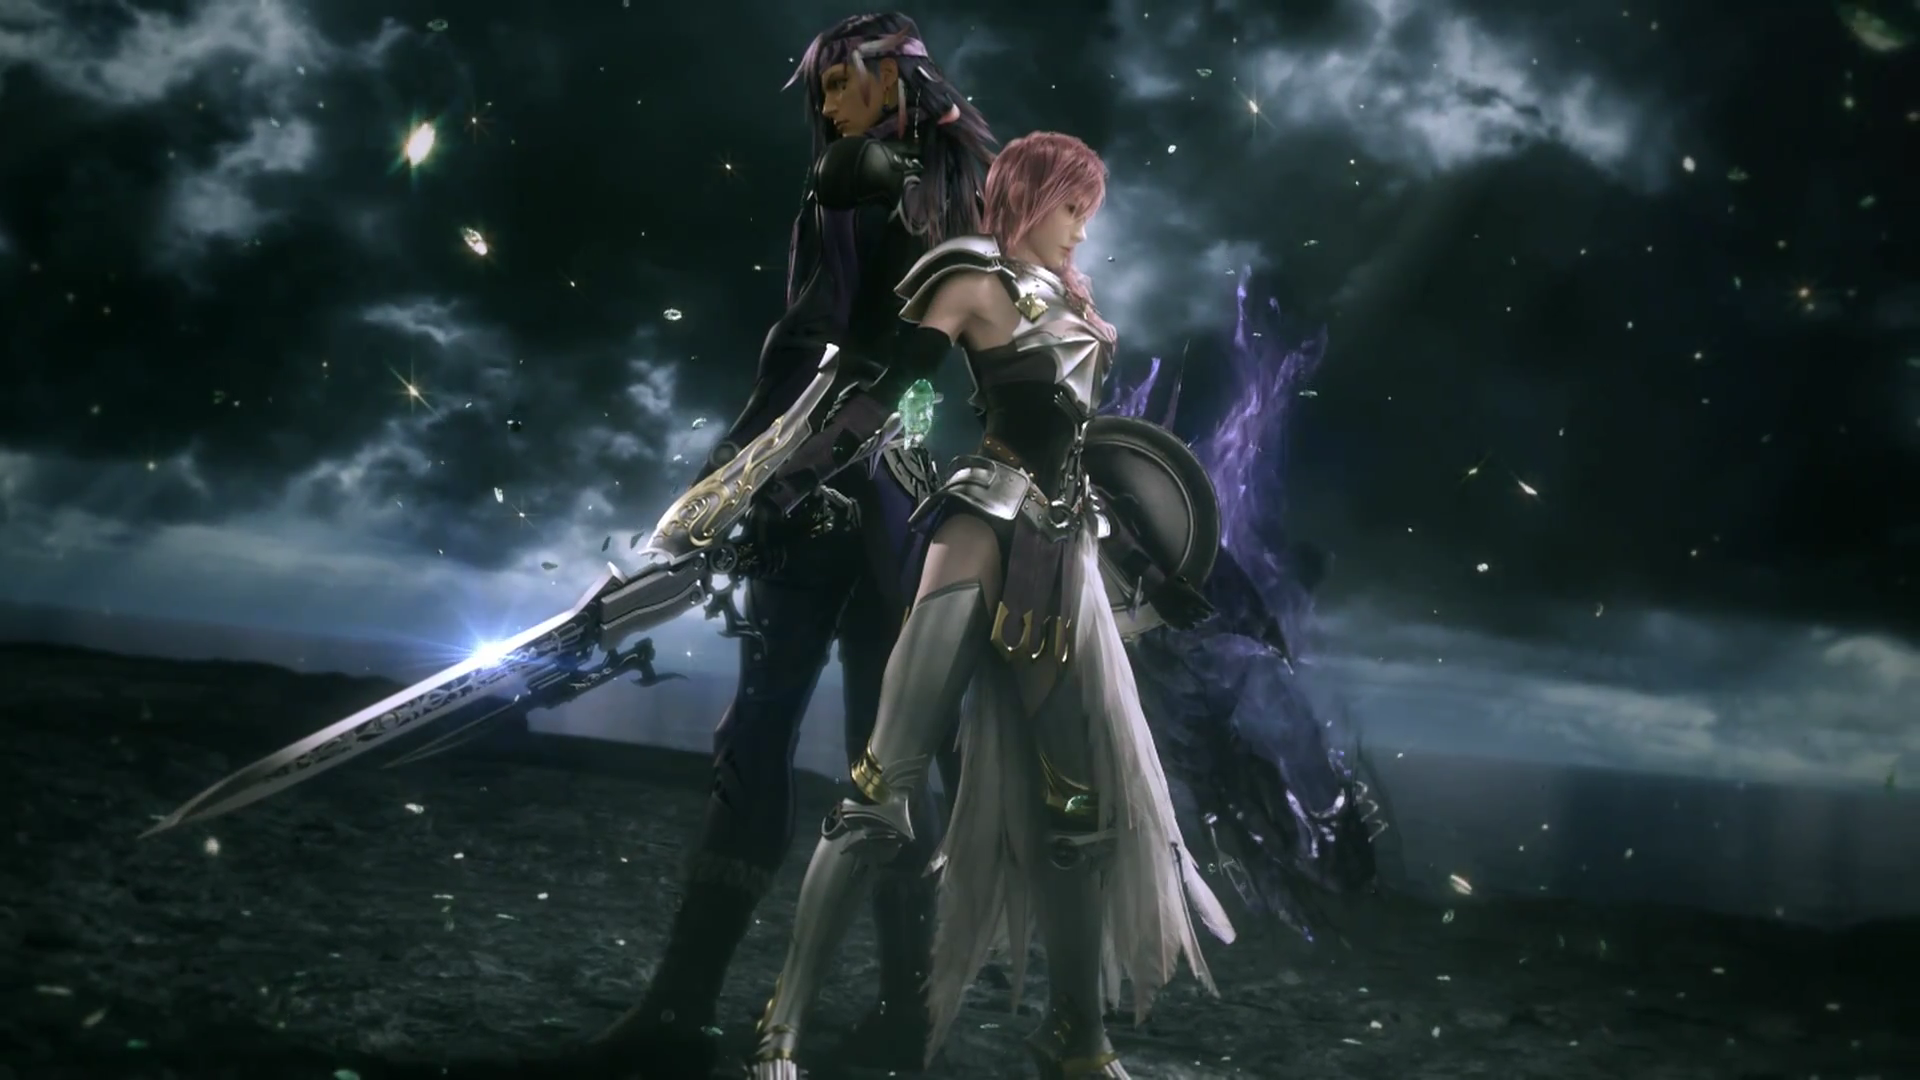 Free Download Final Fantasy Wallpapers Hd 19x1080 For Your Desktop Mobile Tablet Explore 77 Ff Wallpaper Ffxiii Wallpaper Ffxi Wallpaper Lightning Ff Wallpaper